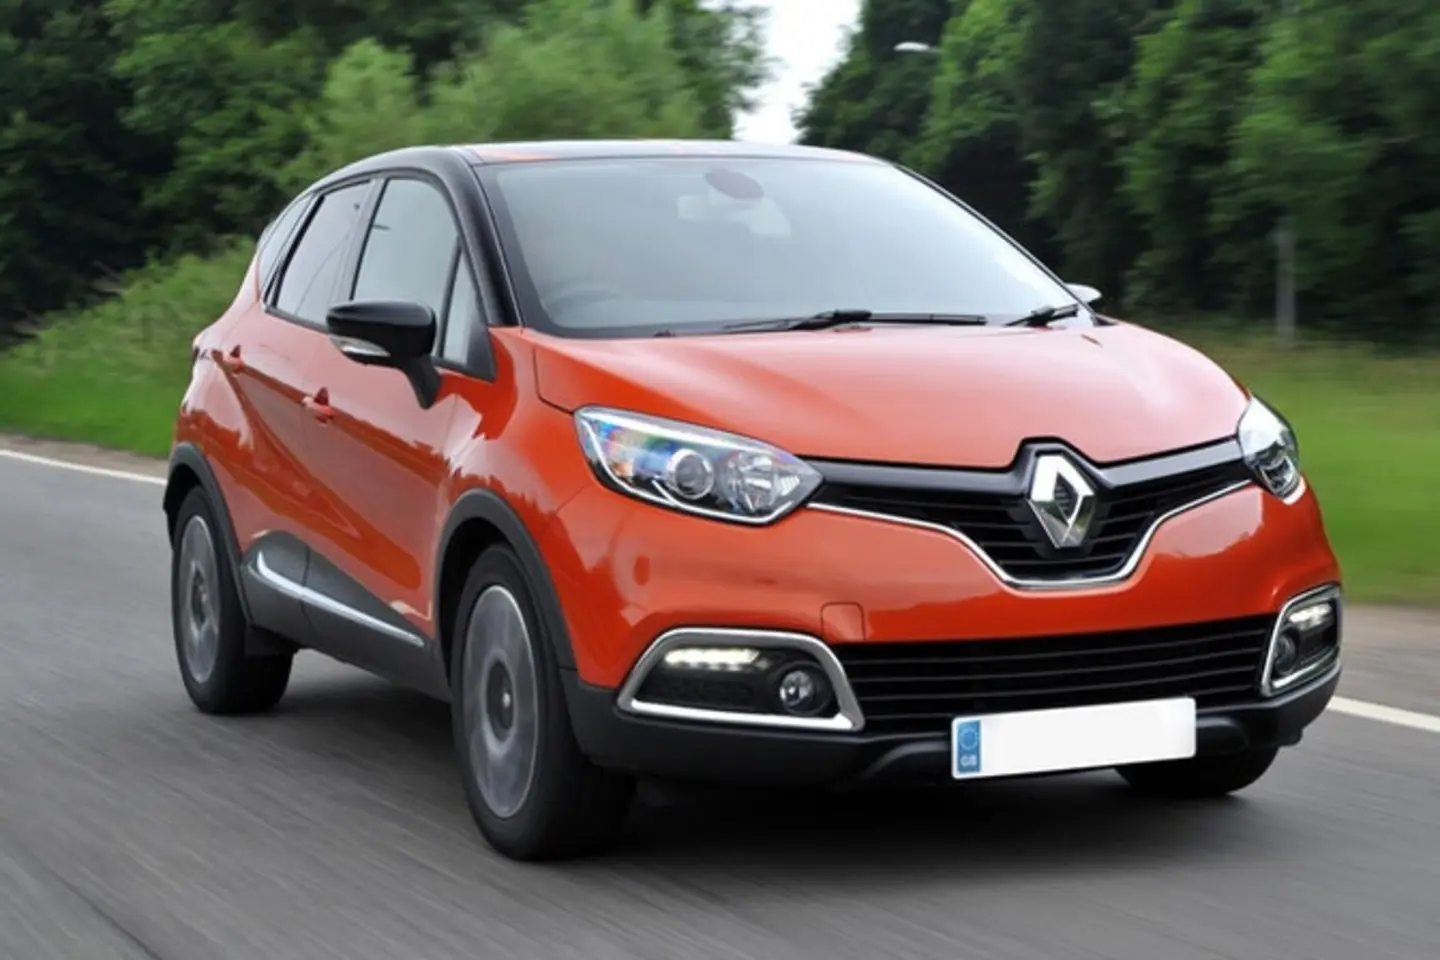 The exterior of a red Renault Captur